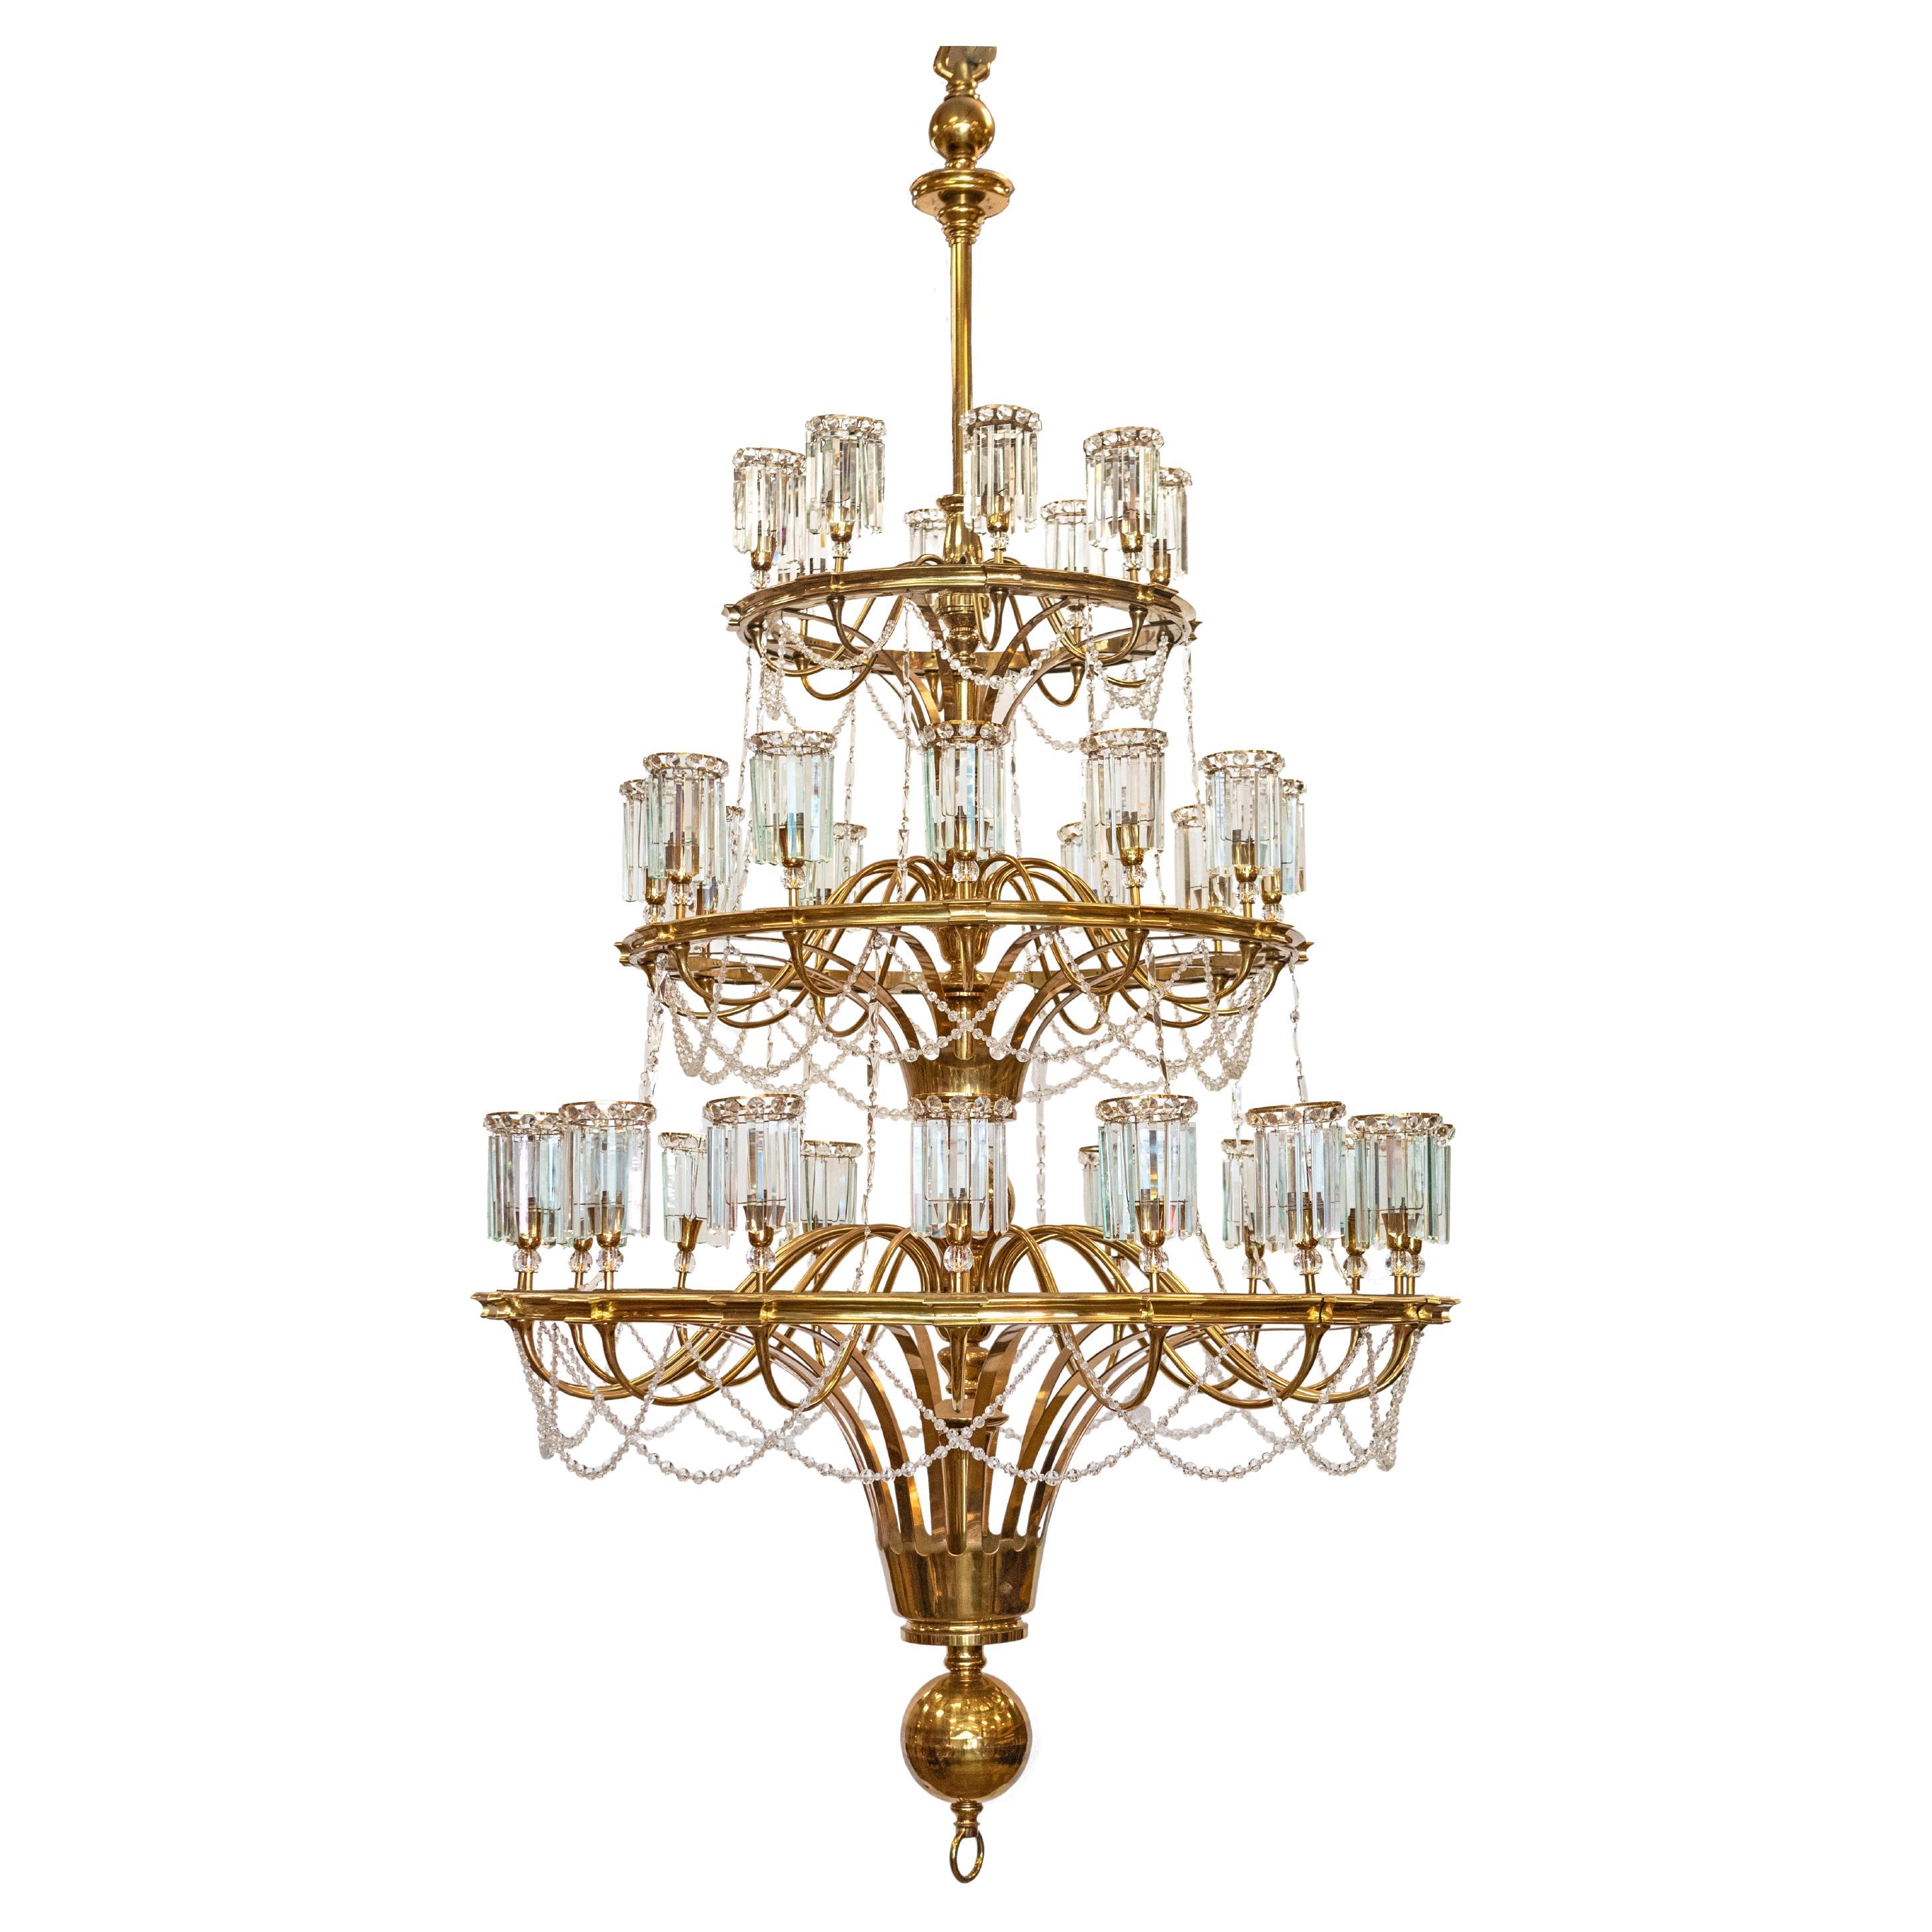 Giant Reclaimed Brass & Crystal Chandelier  >4m Tall